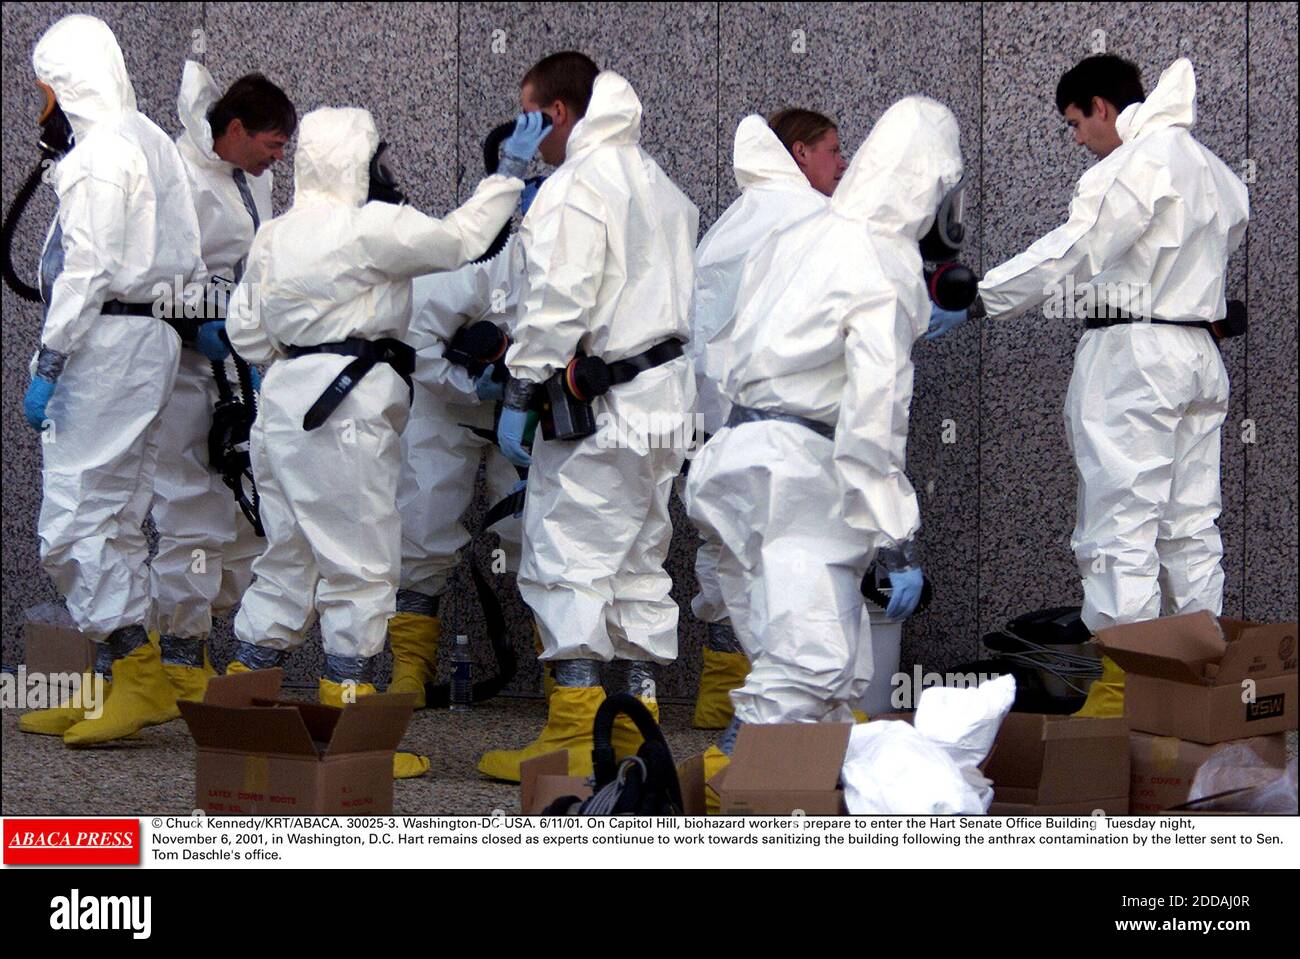 NO FILM, NO VIDEO, NO TV, NO DOCUMENTARY - © Chuck Kennedy/KRT/ABACA. 30025-3. Washington-DC-USA. 6/11/01. On Capitol Hill, biohazard workers prepare to enter the Hart Senate Office Building Tuesday night, November 6, 2001, in Washington, D.C. Hart remains closed as experts continue to work toward Stock Photo